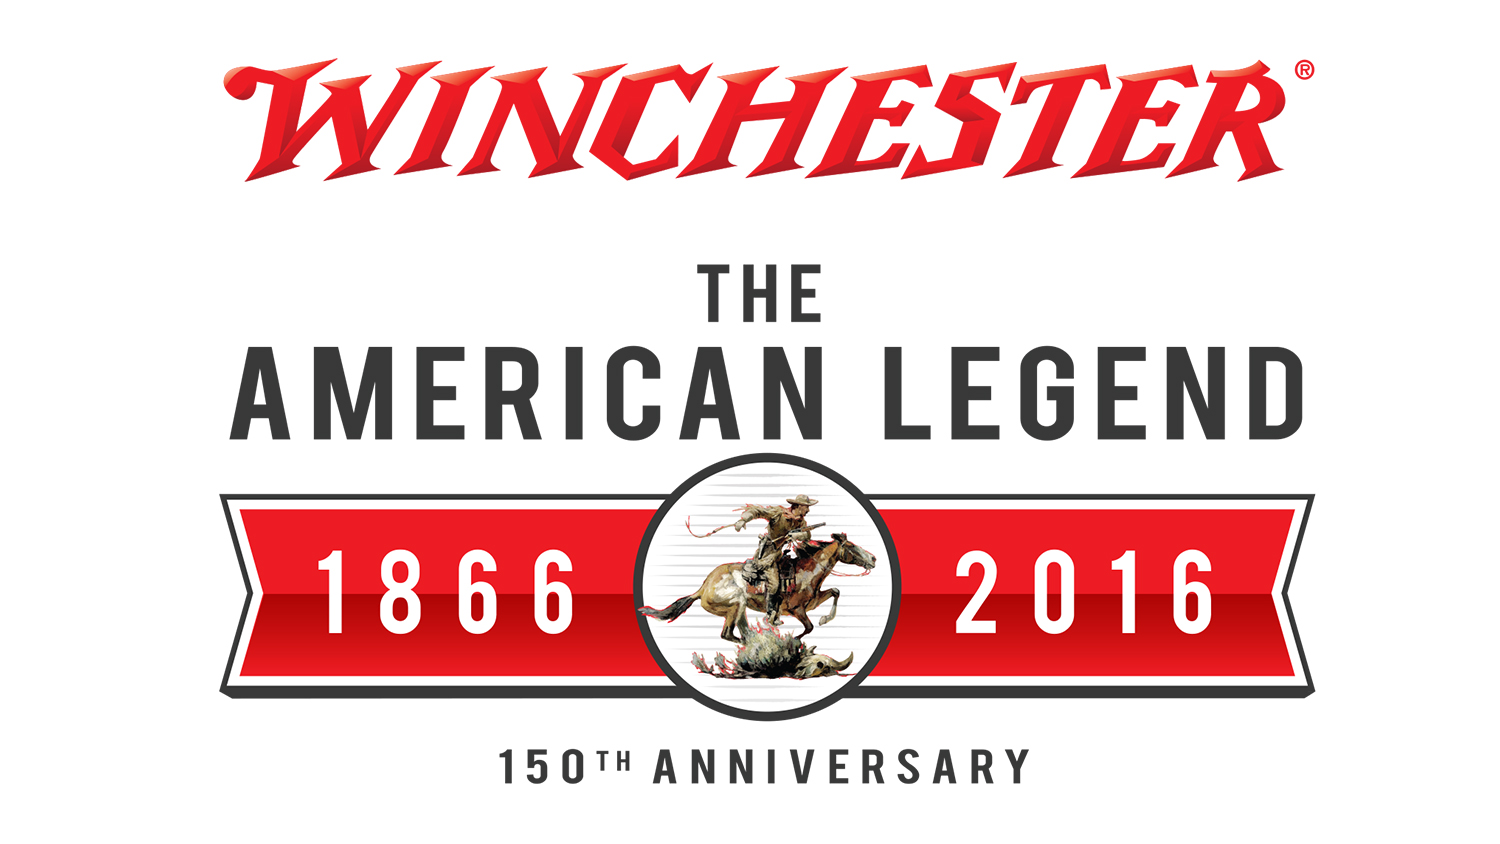 Celebrating Winchester’s 150th Anniversary at NRA Annual Meetings